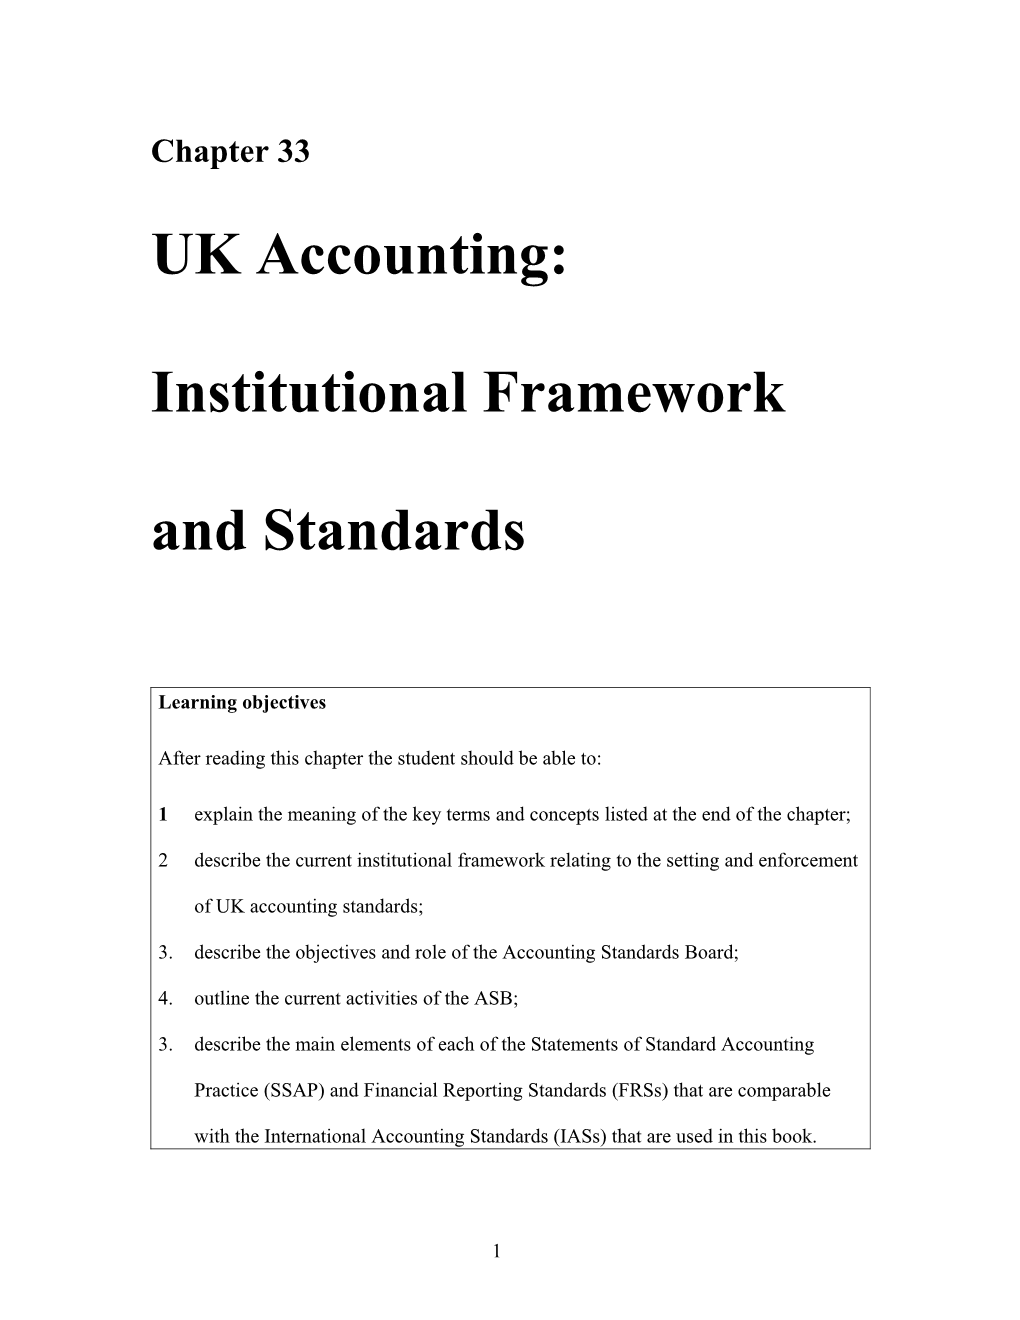 UK Accounting: Institutional Framework and Standards